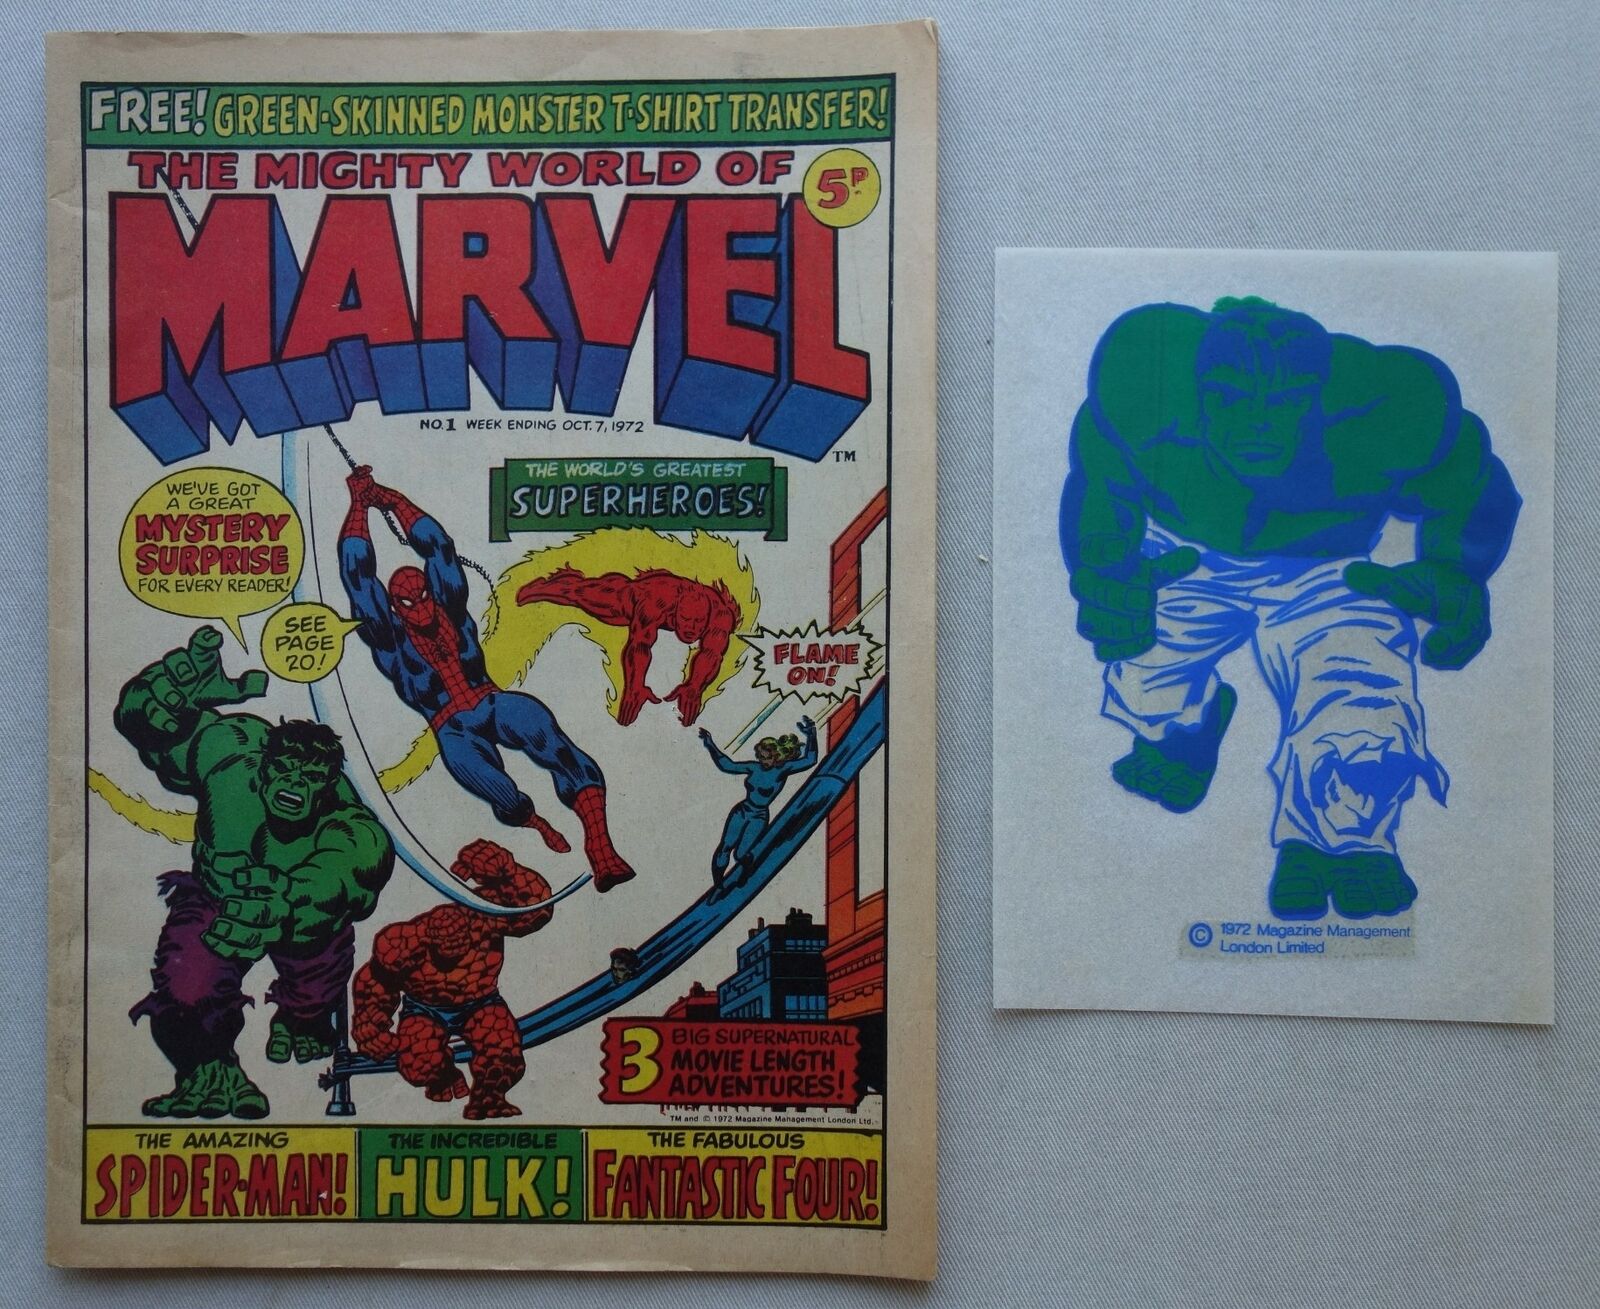 Mighty World of Marvel #1, released in 1972 - with its iron-on transfer Free Gift